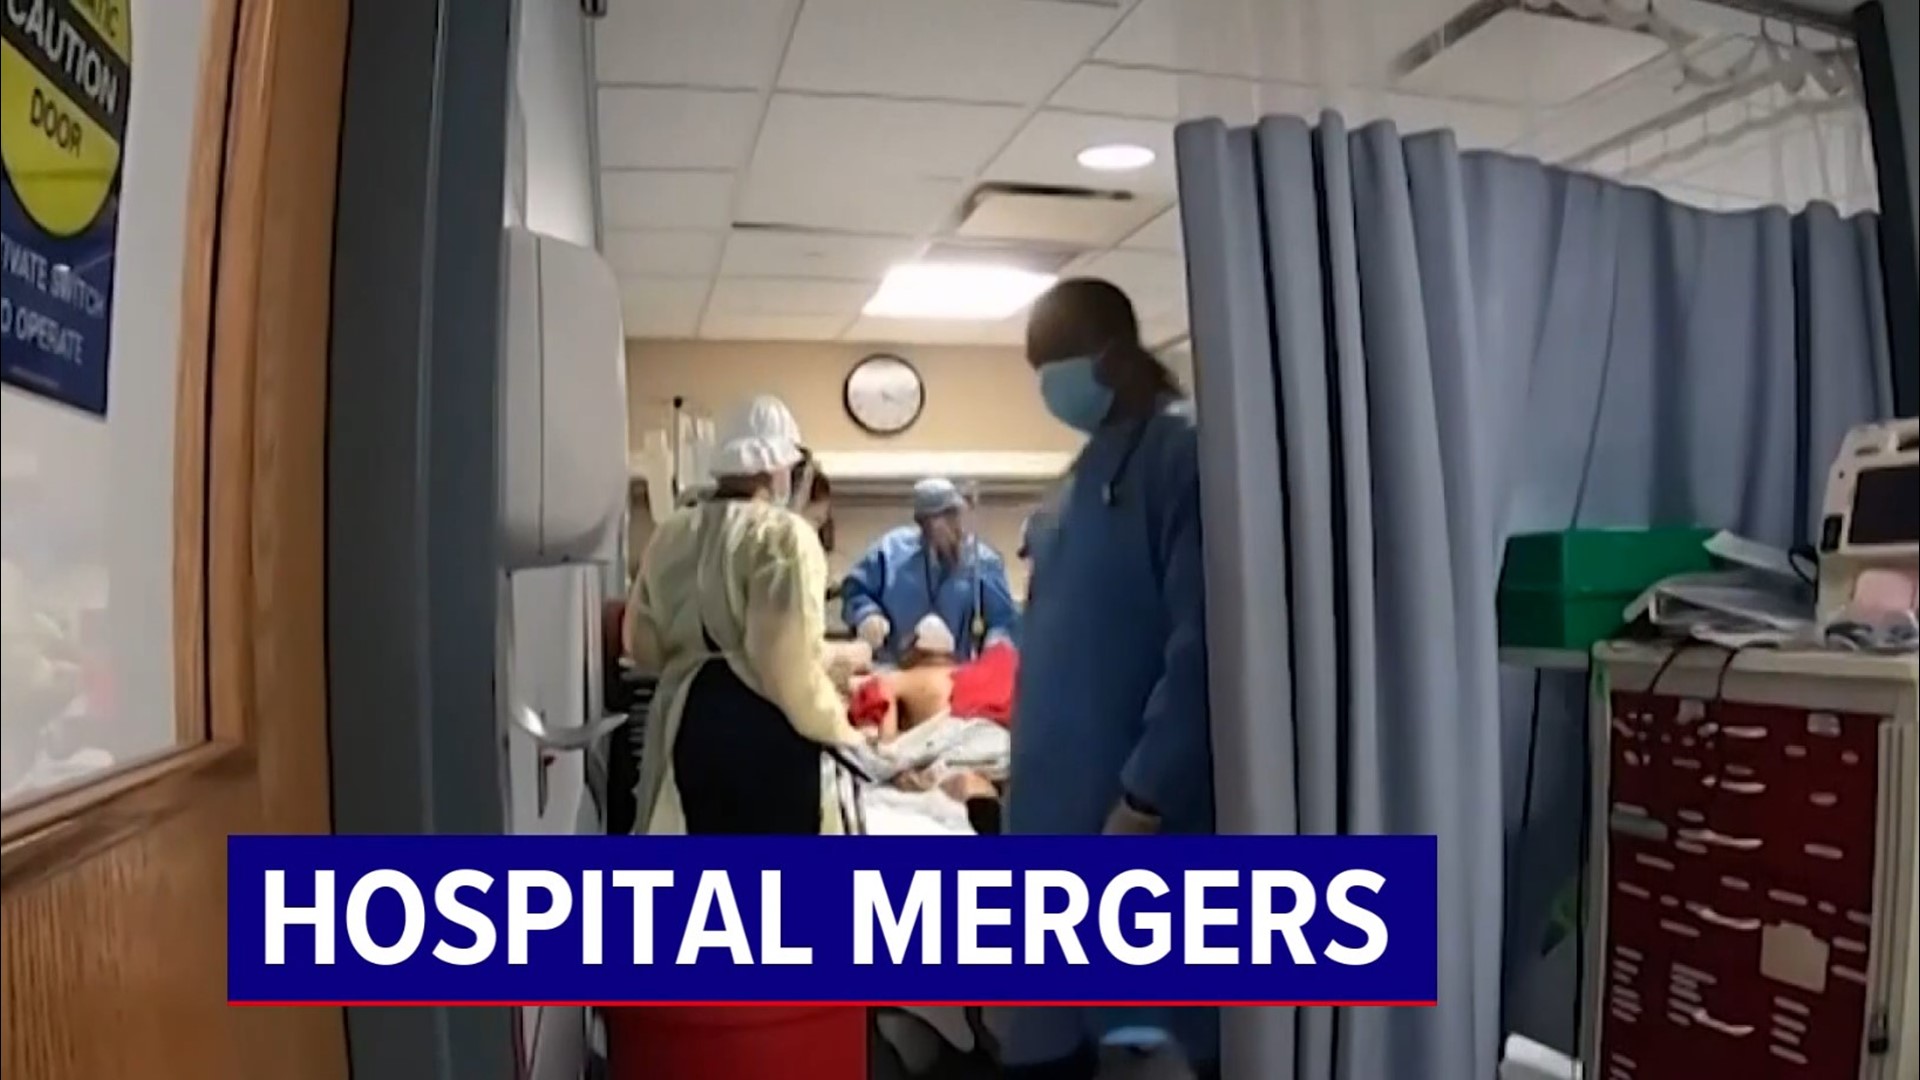 As the healthcare industry struggles financially, we talk about the impacts these hospital merger deals can have, good and bad.